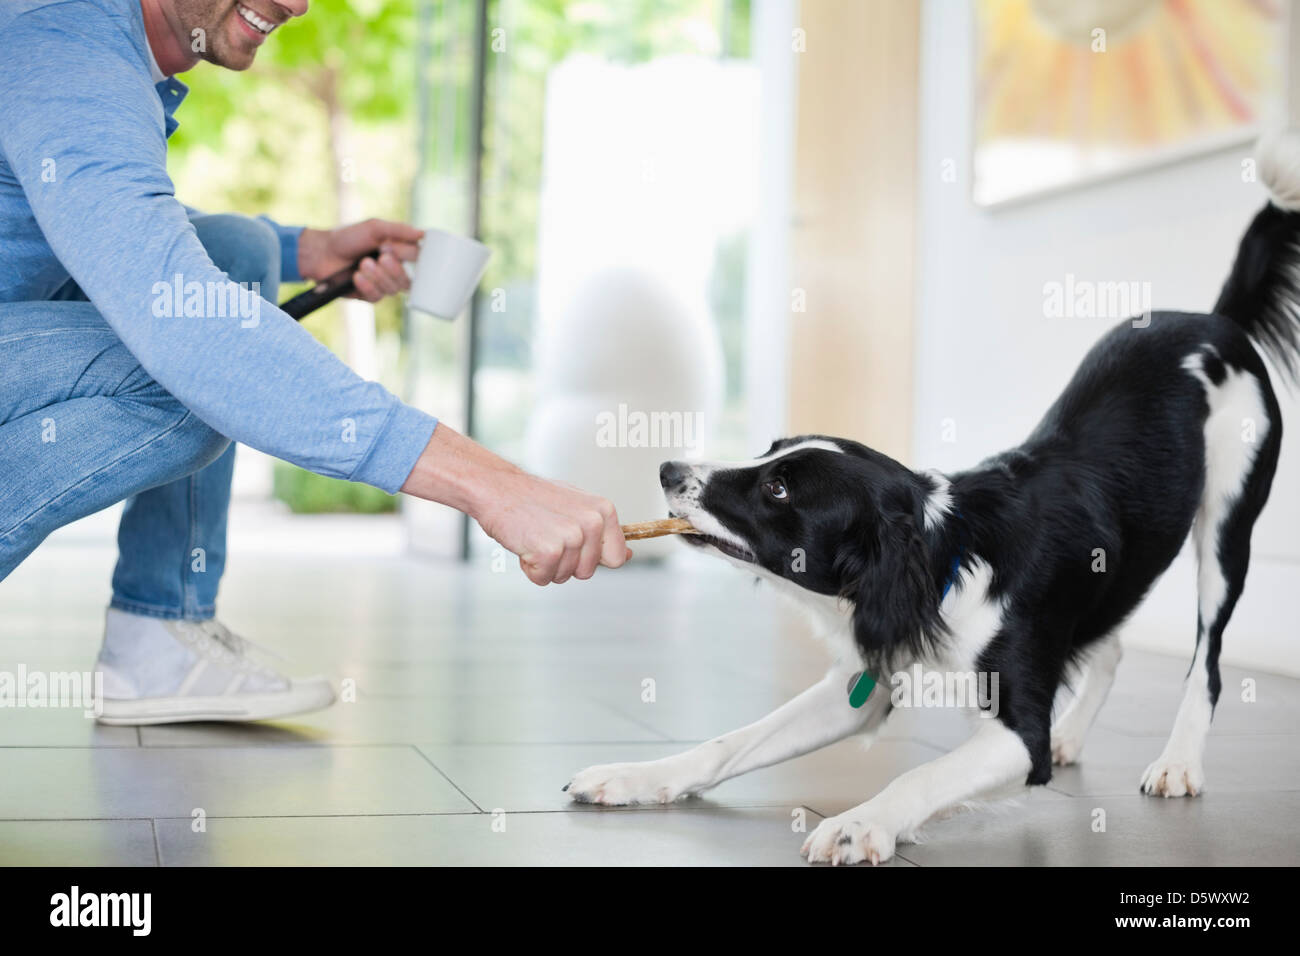 Man playing with dog in kitchen Stock Photo